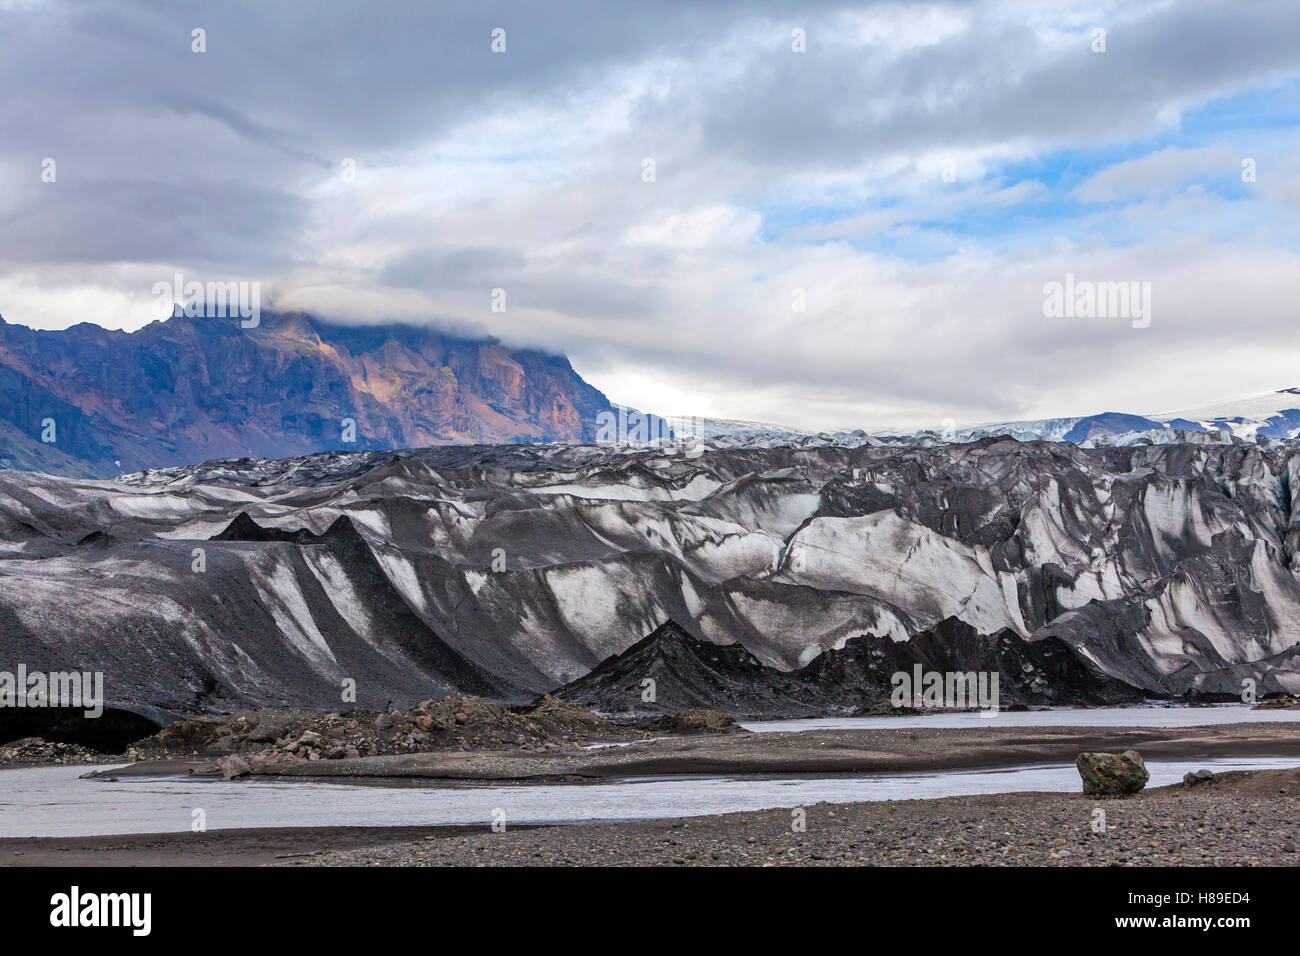 A view of a section of the Skaftafell Glacier in Skaftafell National Park, Iceland. Stock Photo